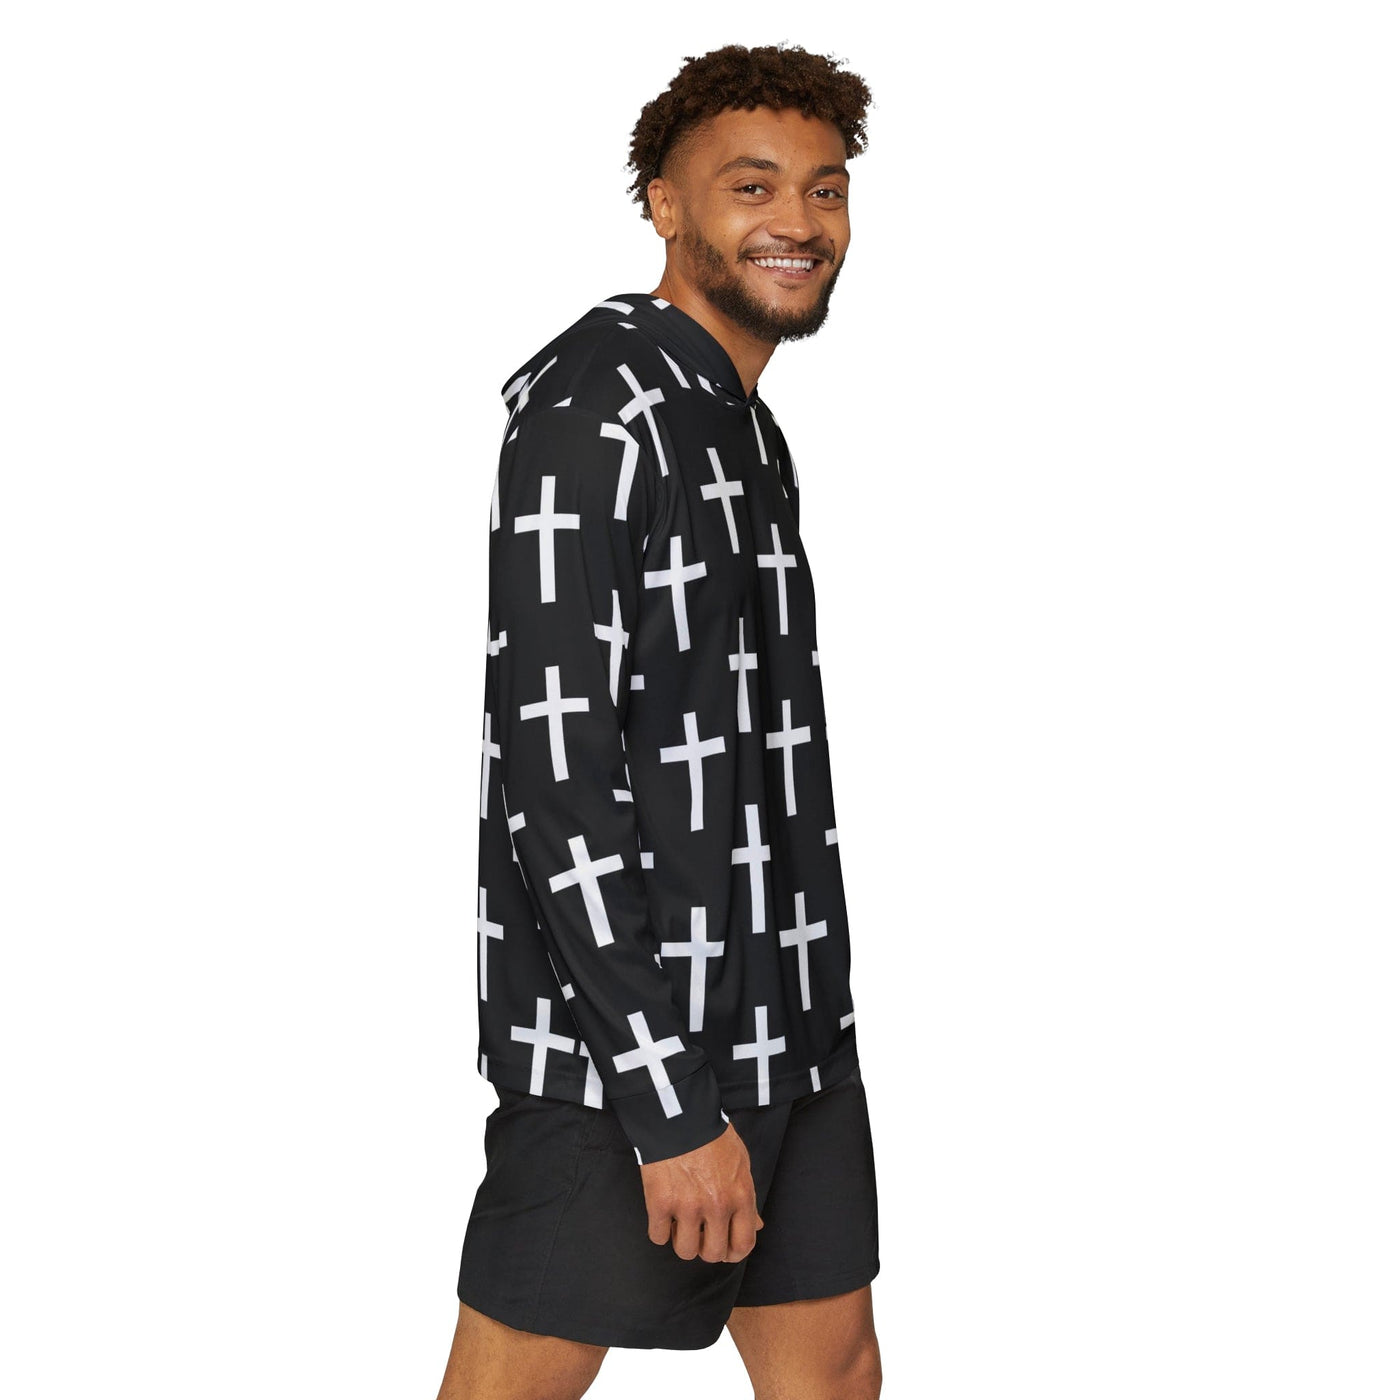 Mens Sports Graphic Hoodie Black And White Seamless Cross Pattern - All Over